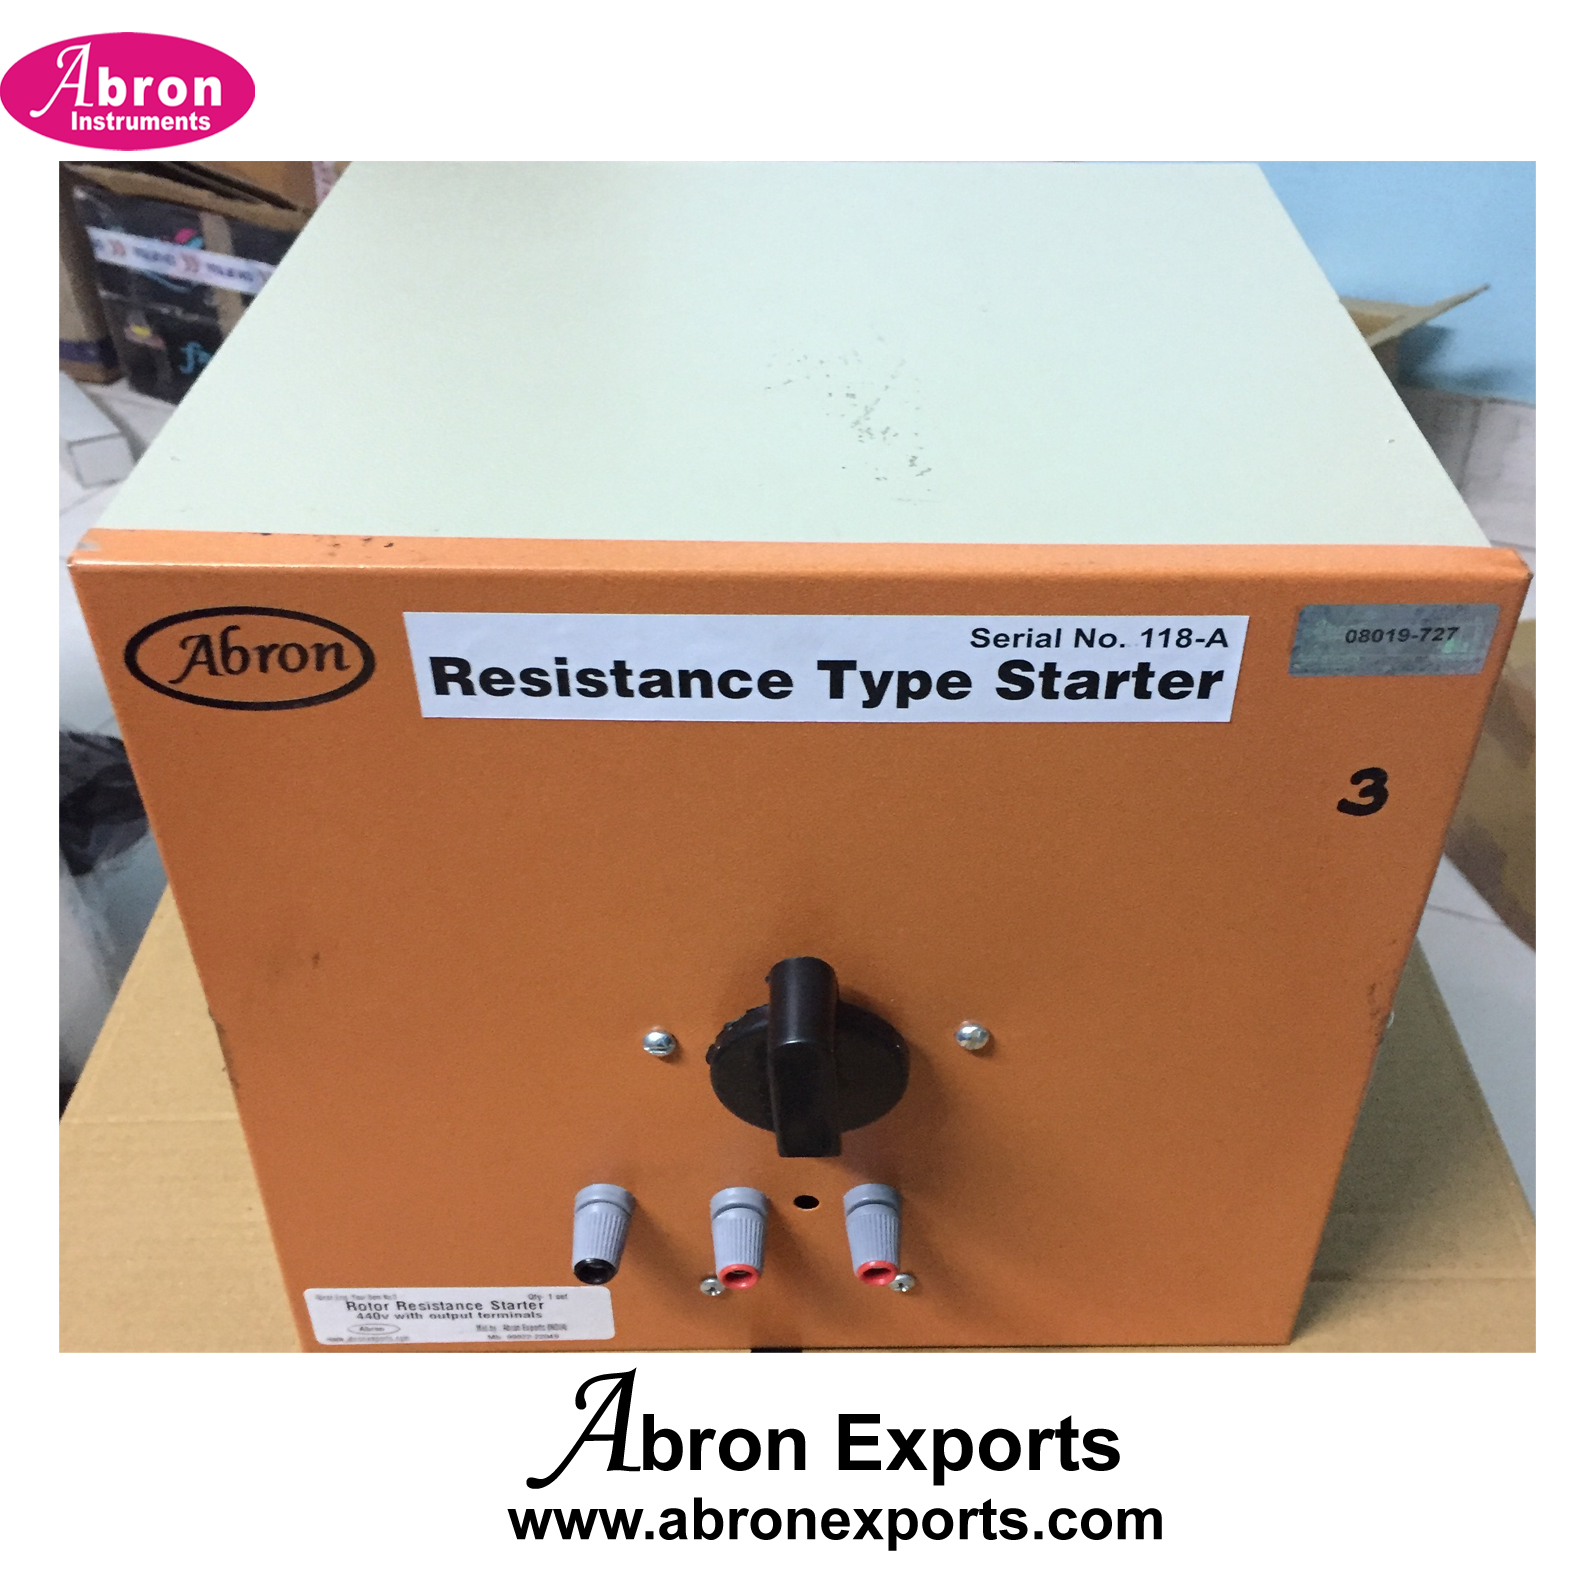 Motor DC Motor Resistance Type Starter with Terminals and Rotary switch in Metalic box Abron AE-8463MSR 